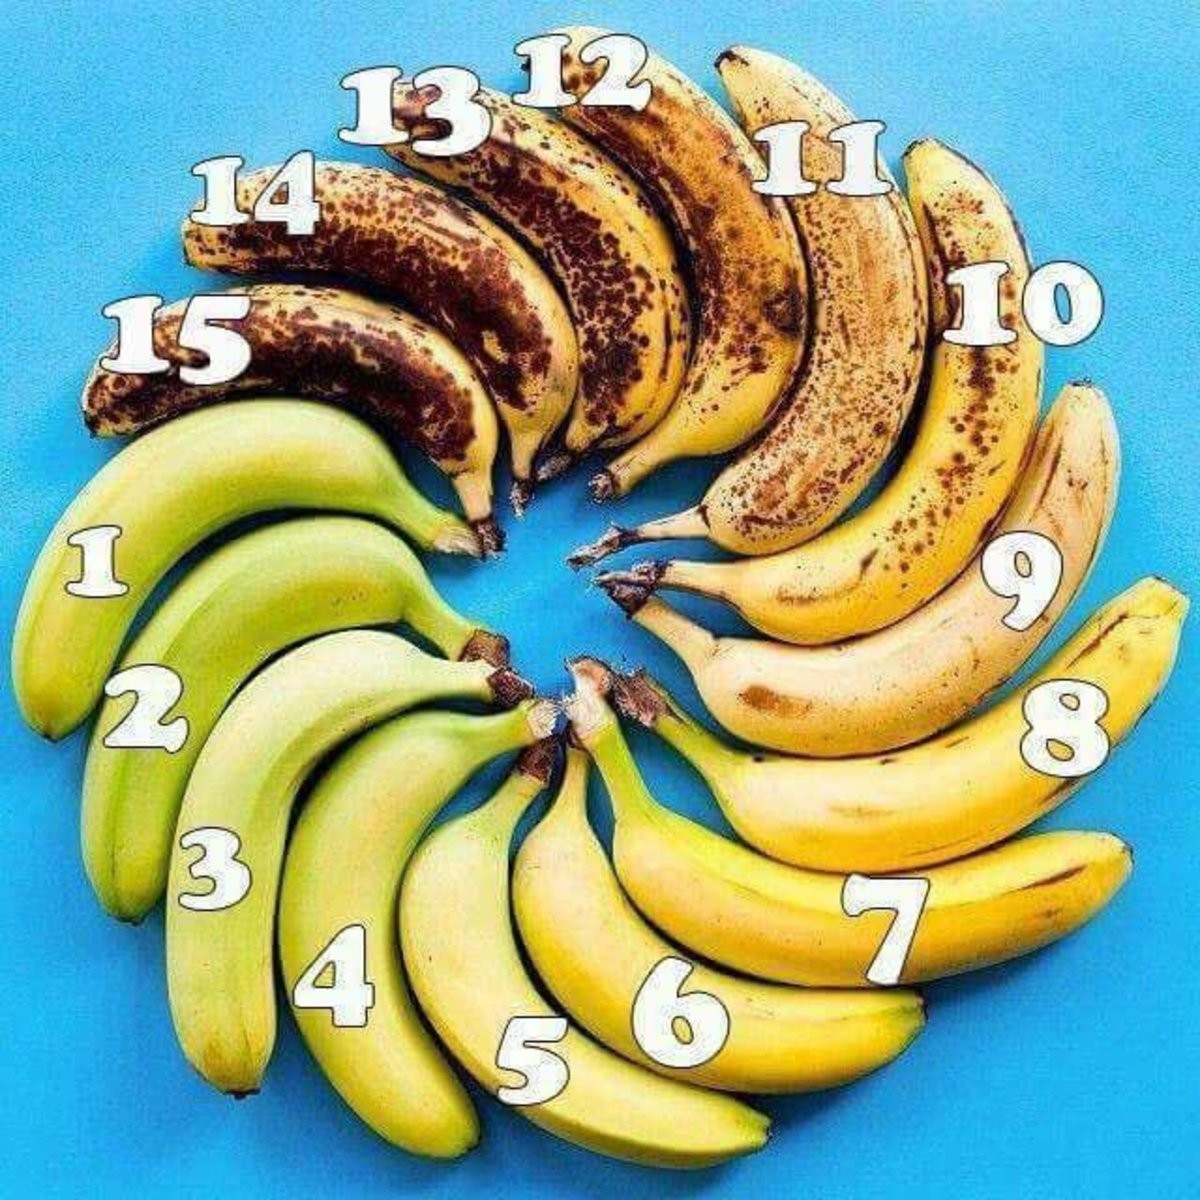 how ripe is your banana (͡° ͜ʖ ͡°). .. 4-6 are the best time to eat the banana.